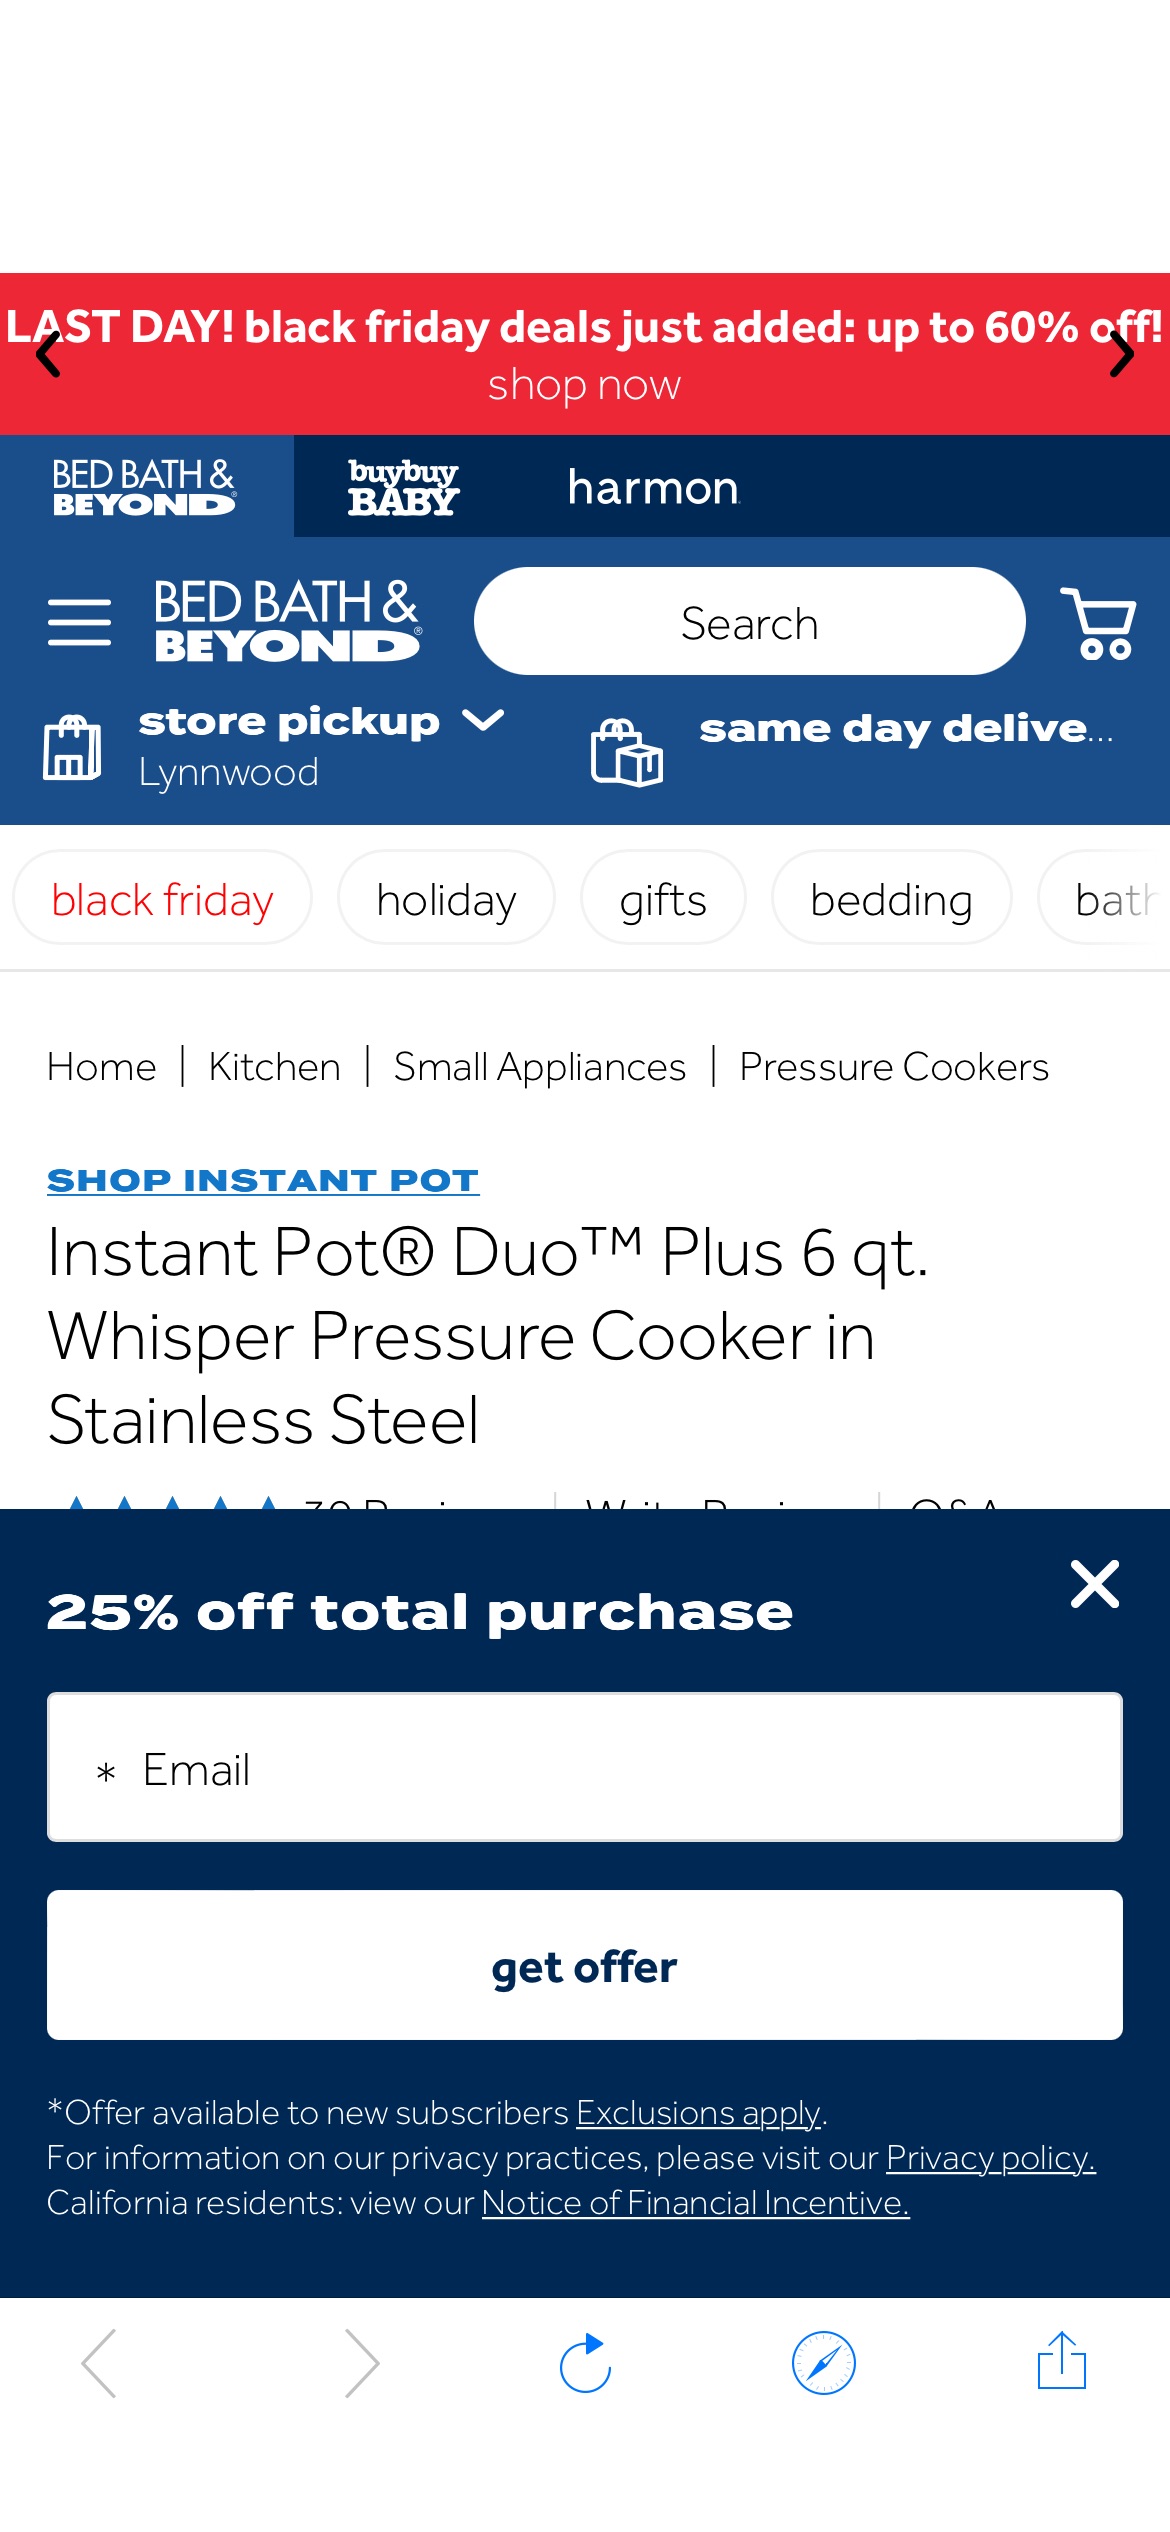 Instant Pot® Duo™ Plus 6 qt. Whisper Pressure Cooker in Stainless Steel | Bed Bath & Beyond